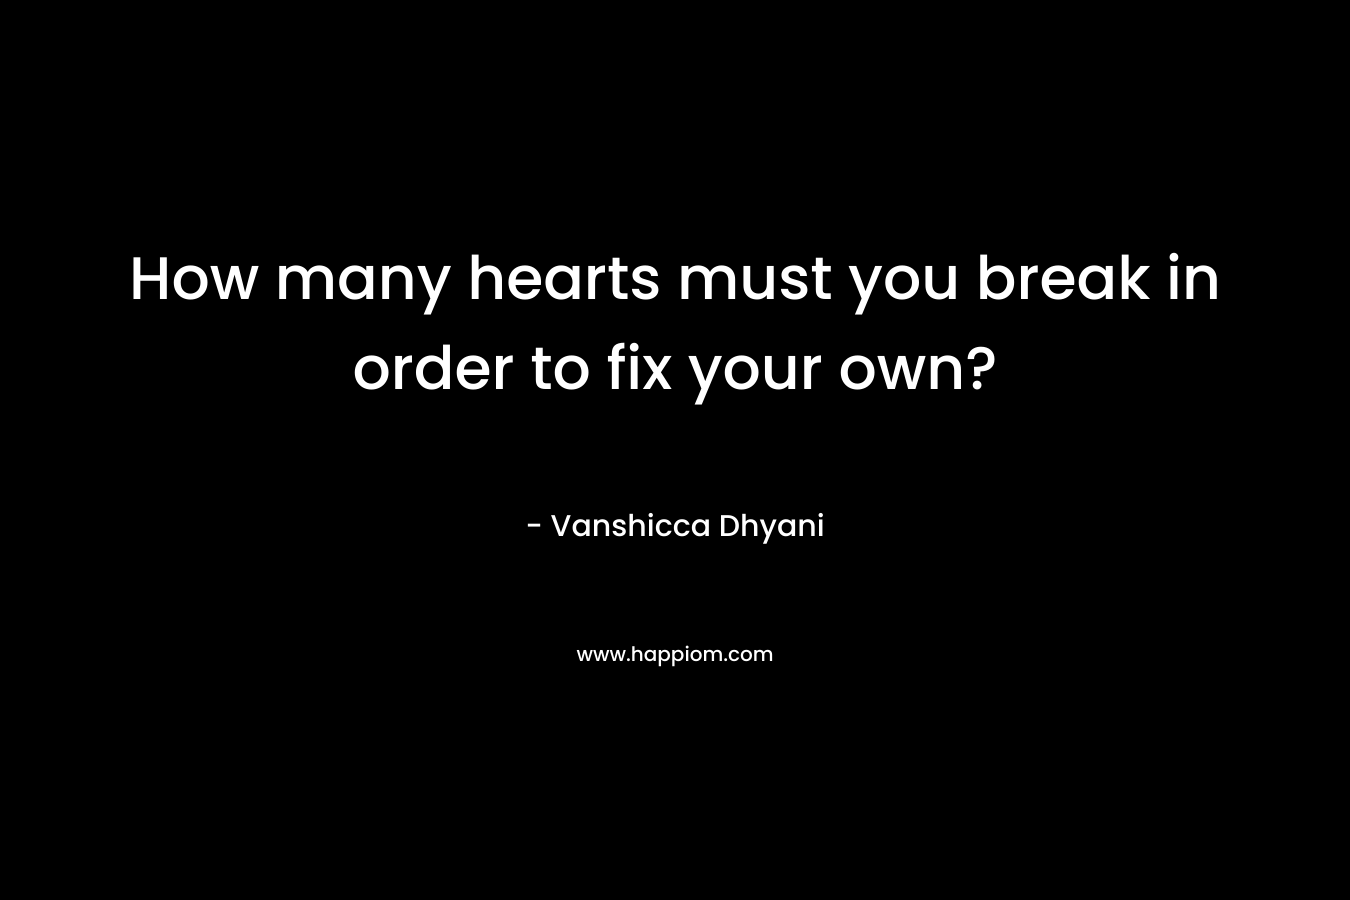 How many hearts must you break in order to fix your own? – Vanshicca Dhyani